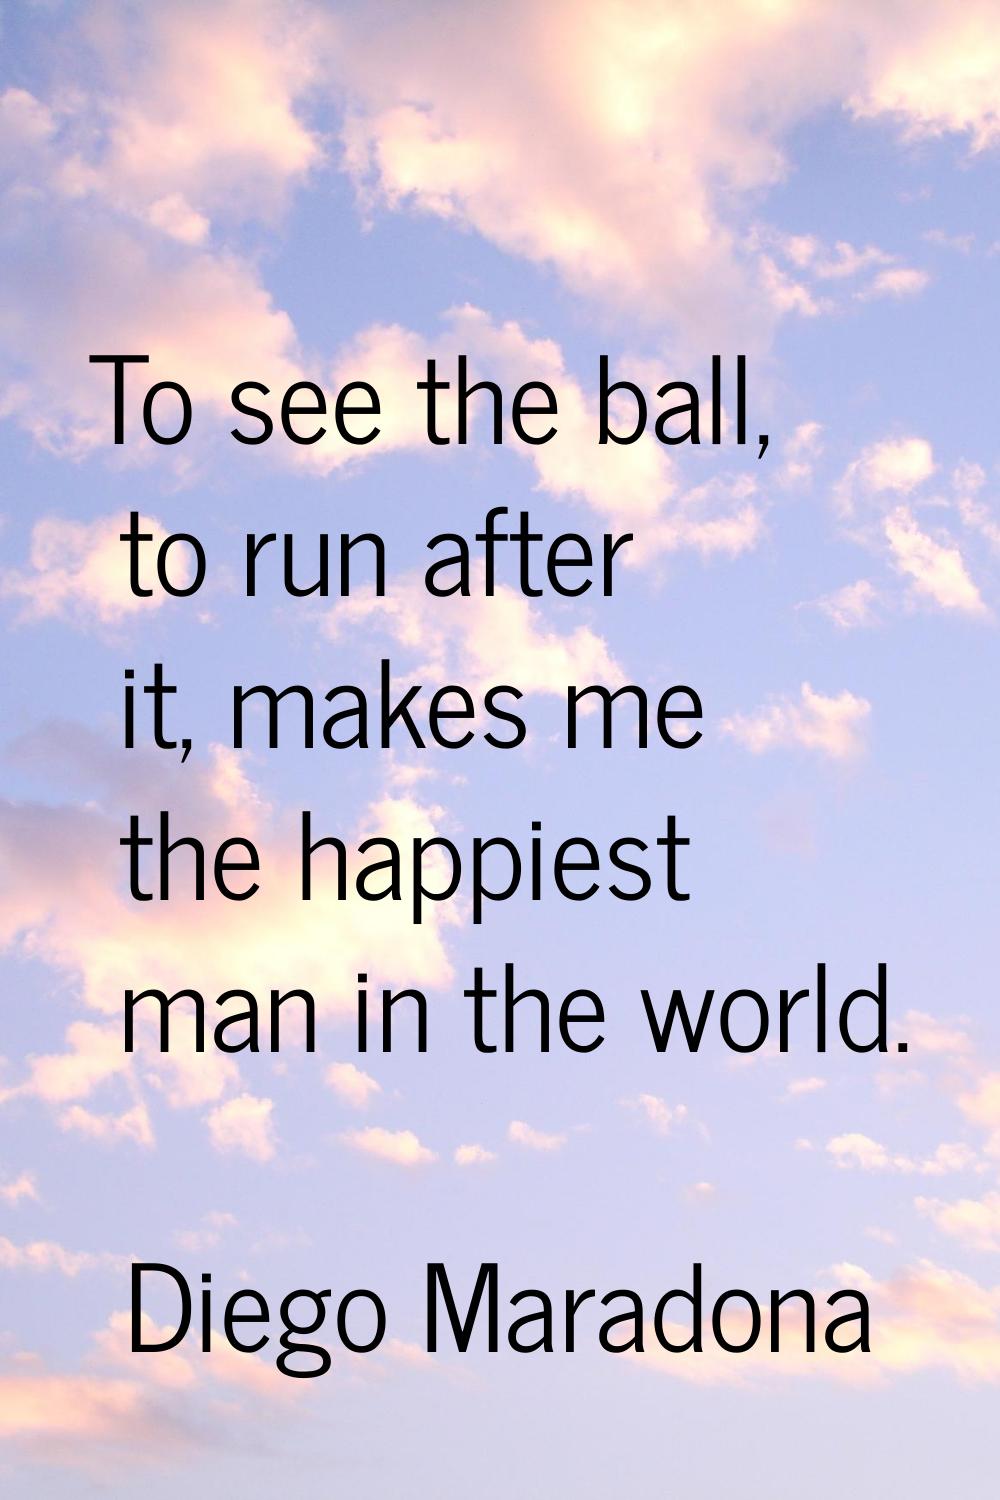 To see the ball, to run after it, makes me the happiest man in the world.